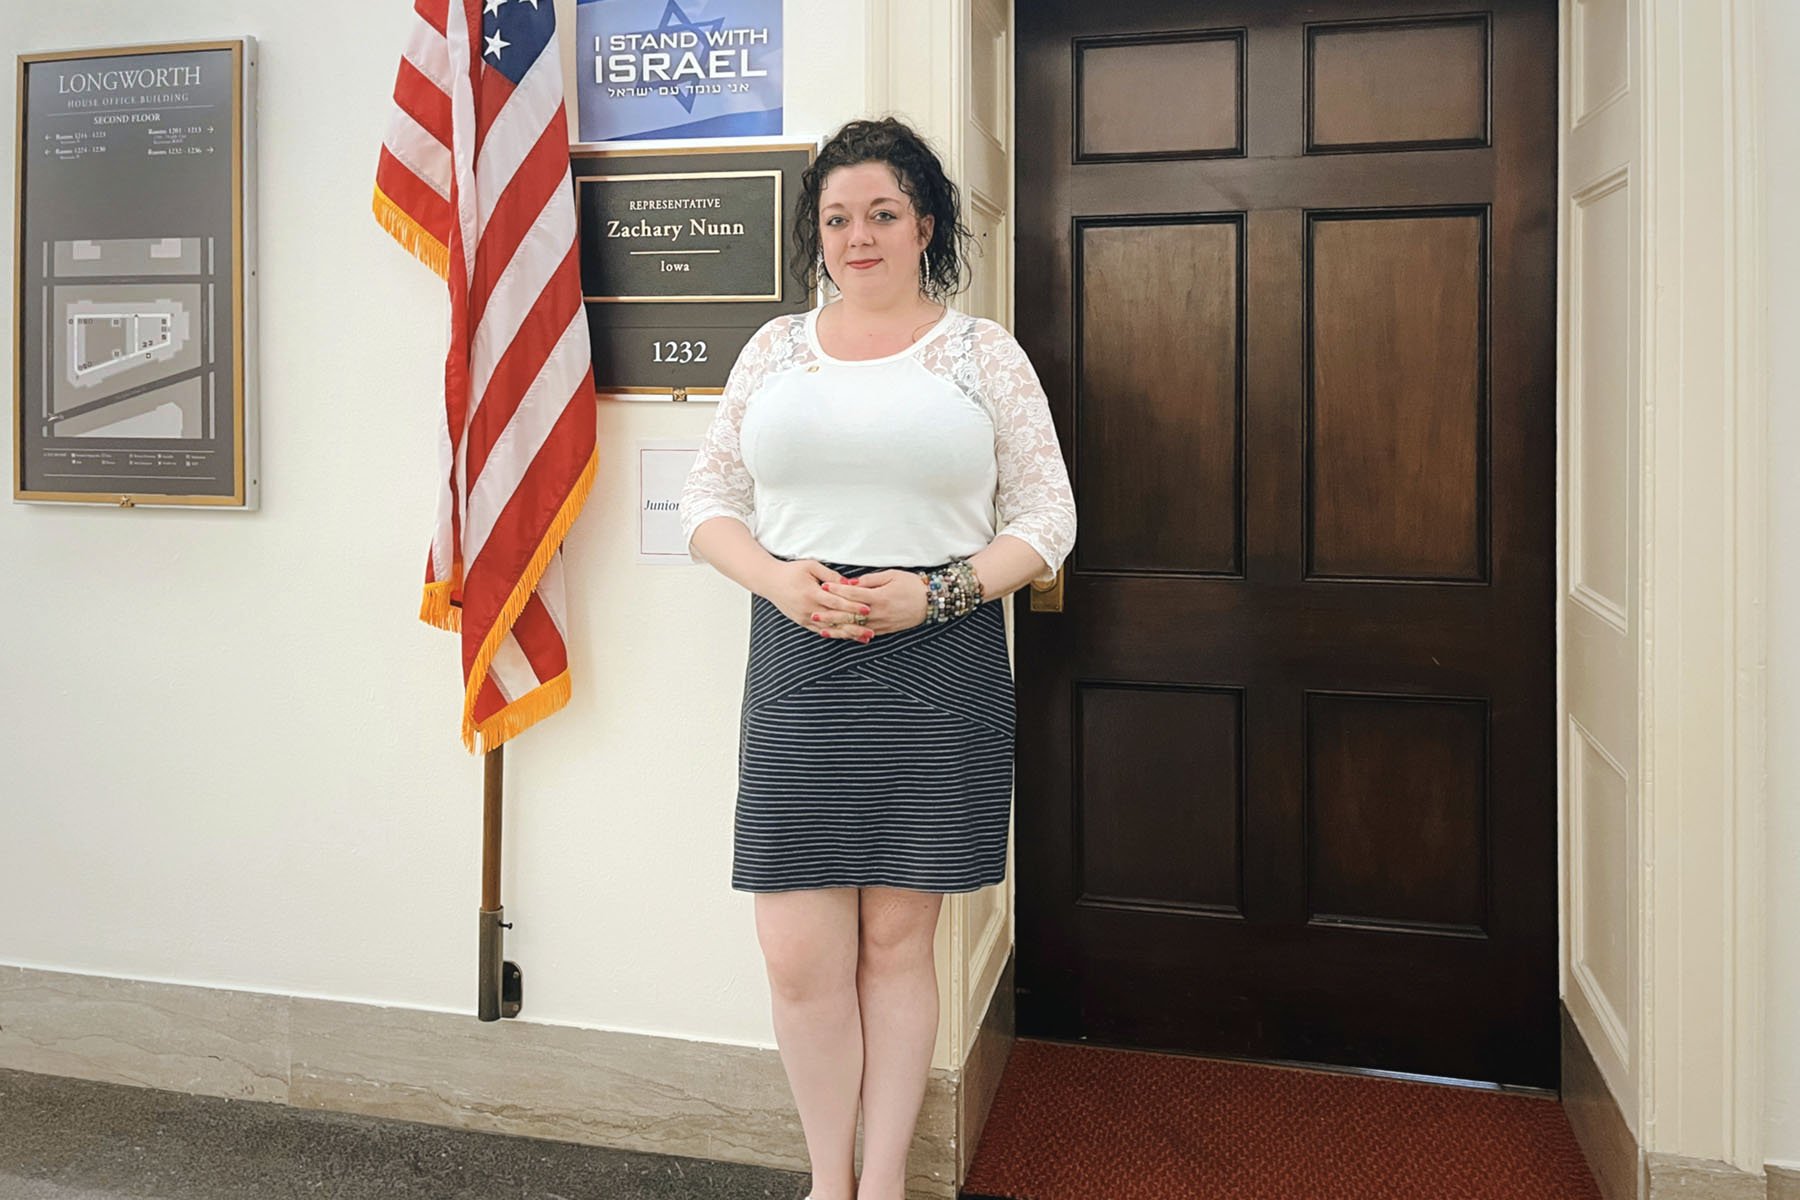 Elizabeth Feldman poses for a portrait in front of the office of Rep. Zach Nunn on Capitol Hill.